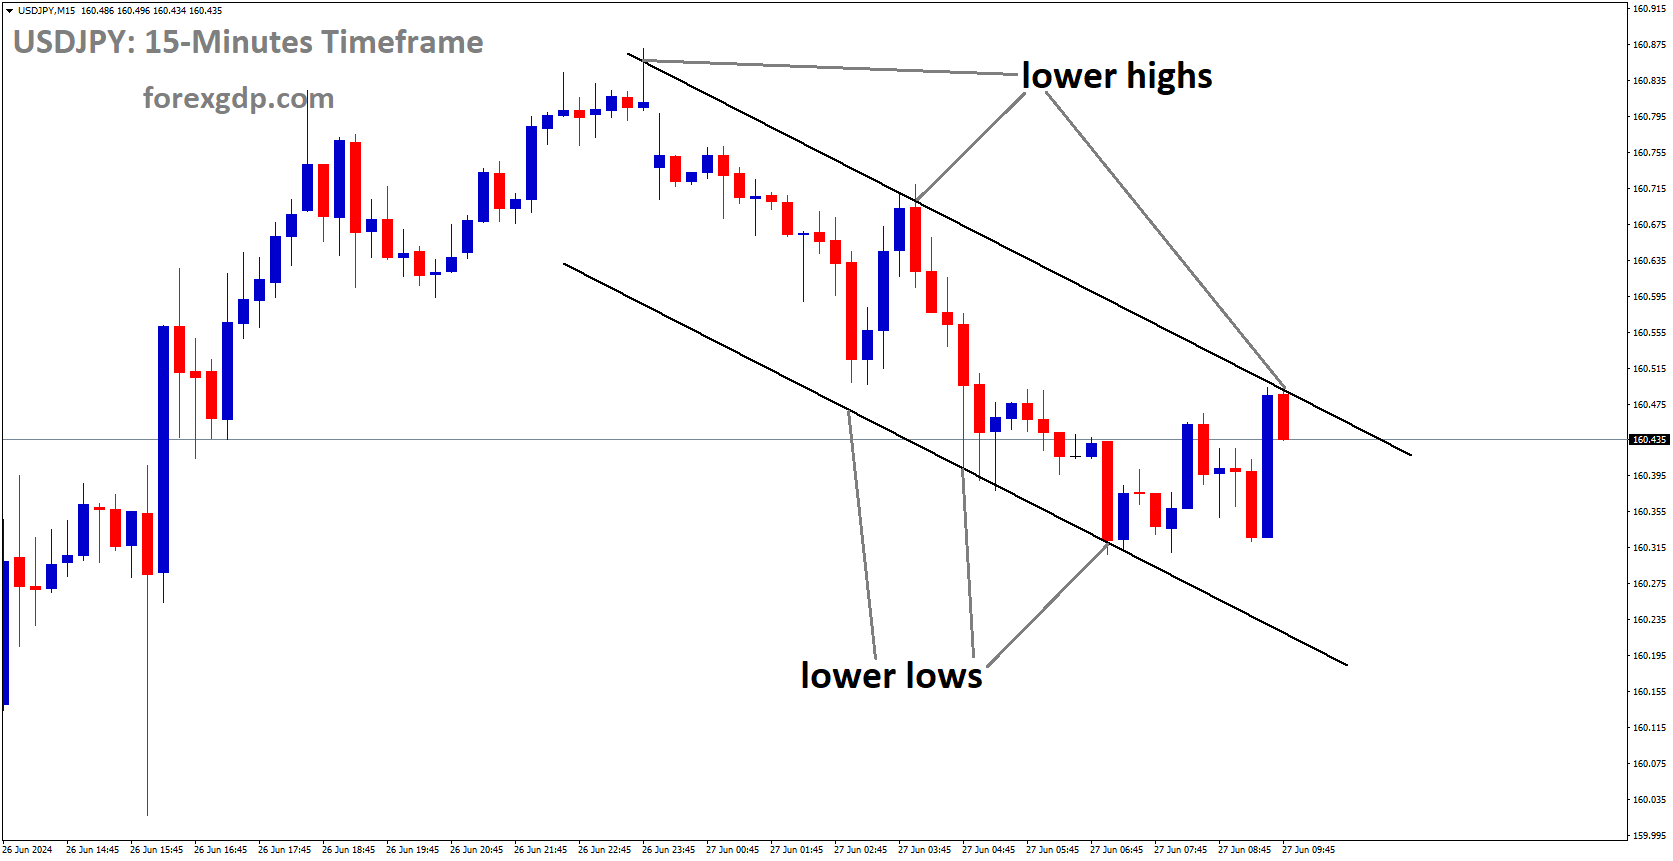 USDJPY is moving in Descending channel and market has fallen from the lower high area of the channel